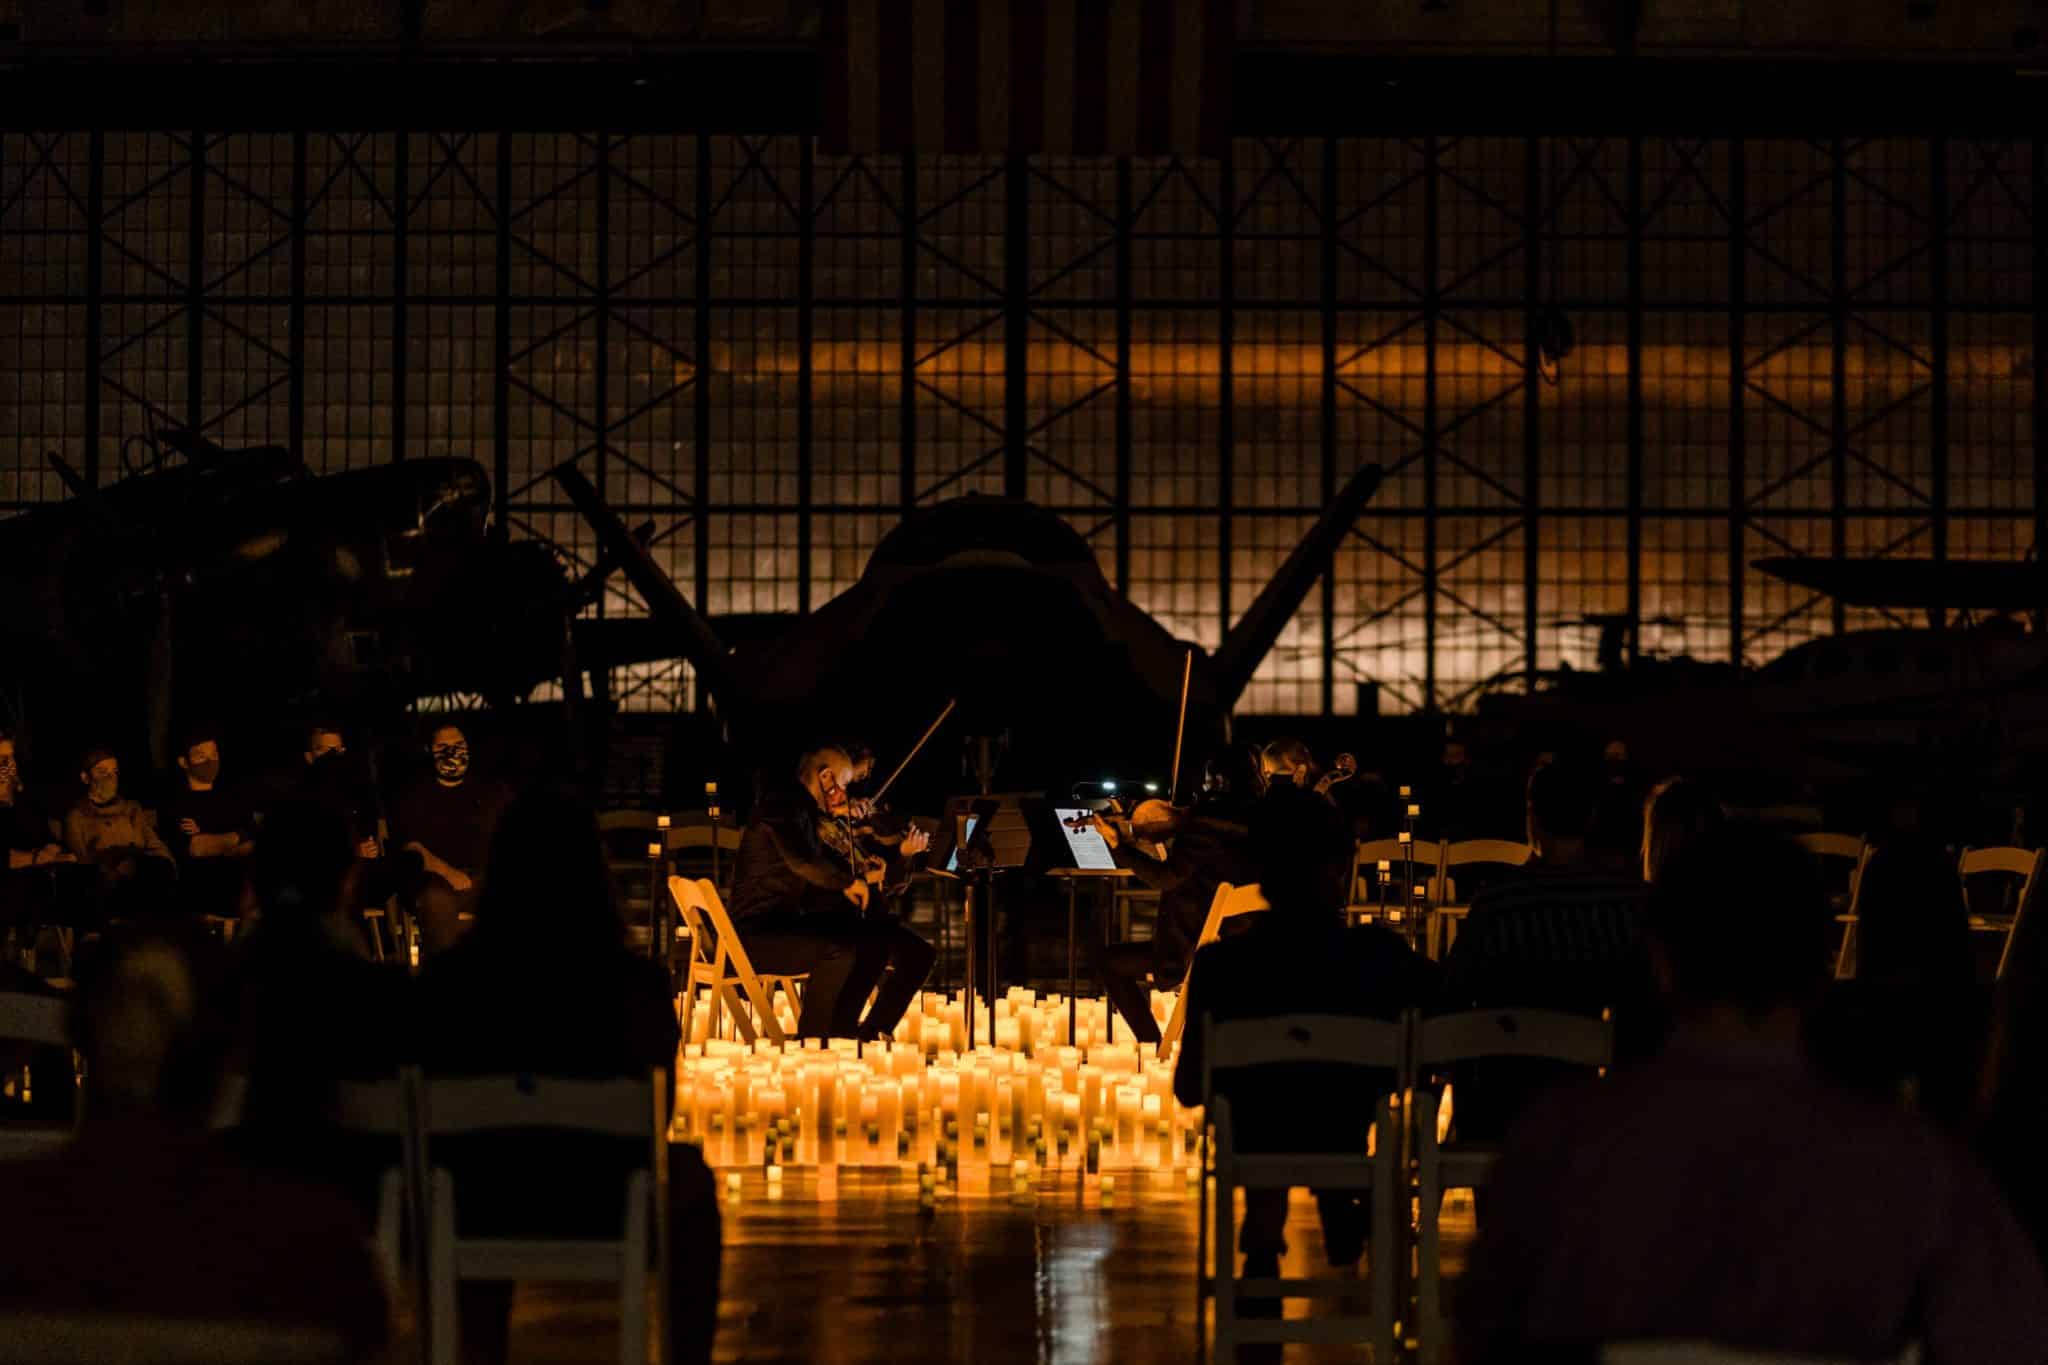 A string quartet performing at a Candlelight concert surrounded by candles.